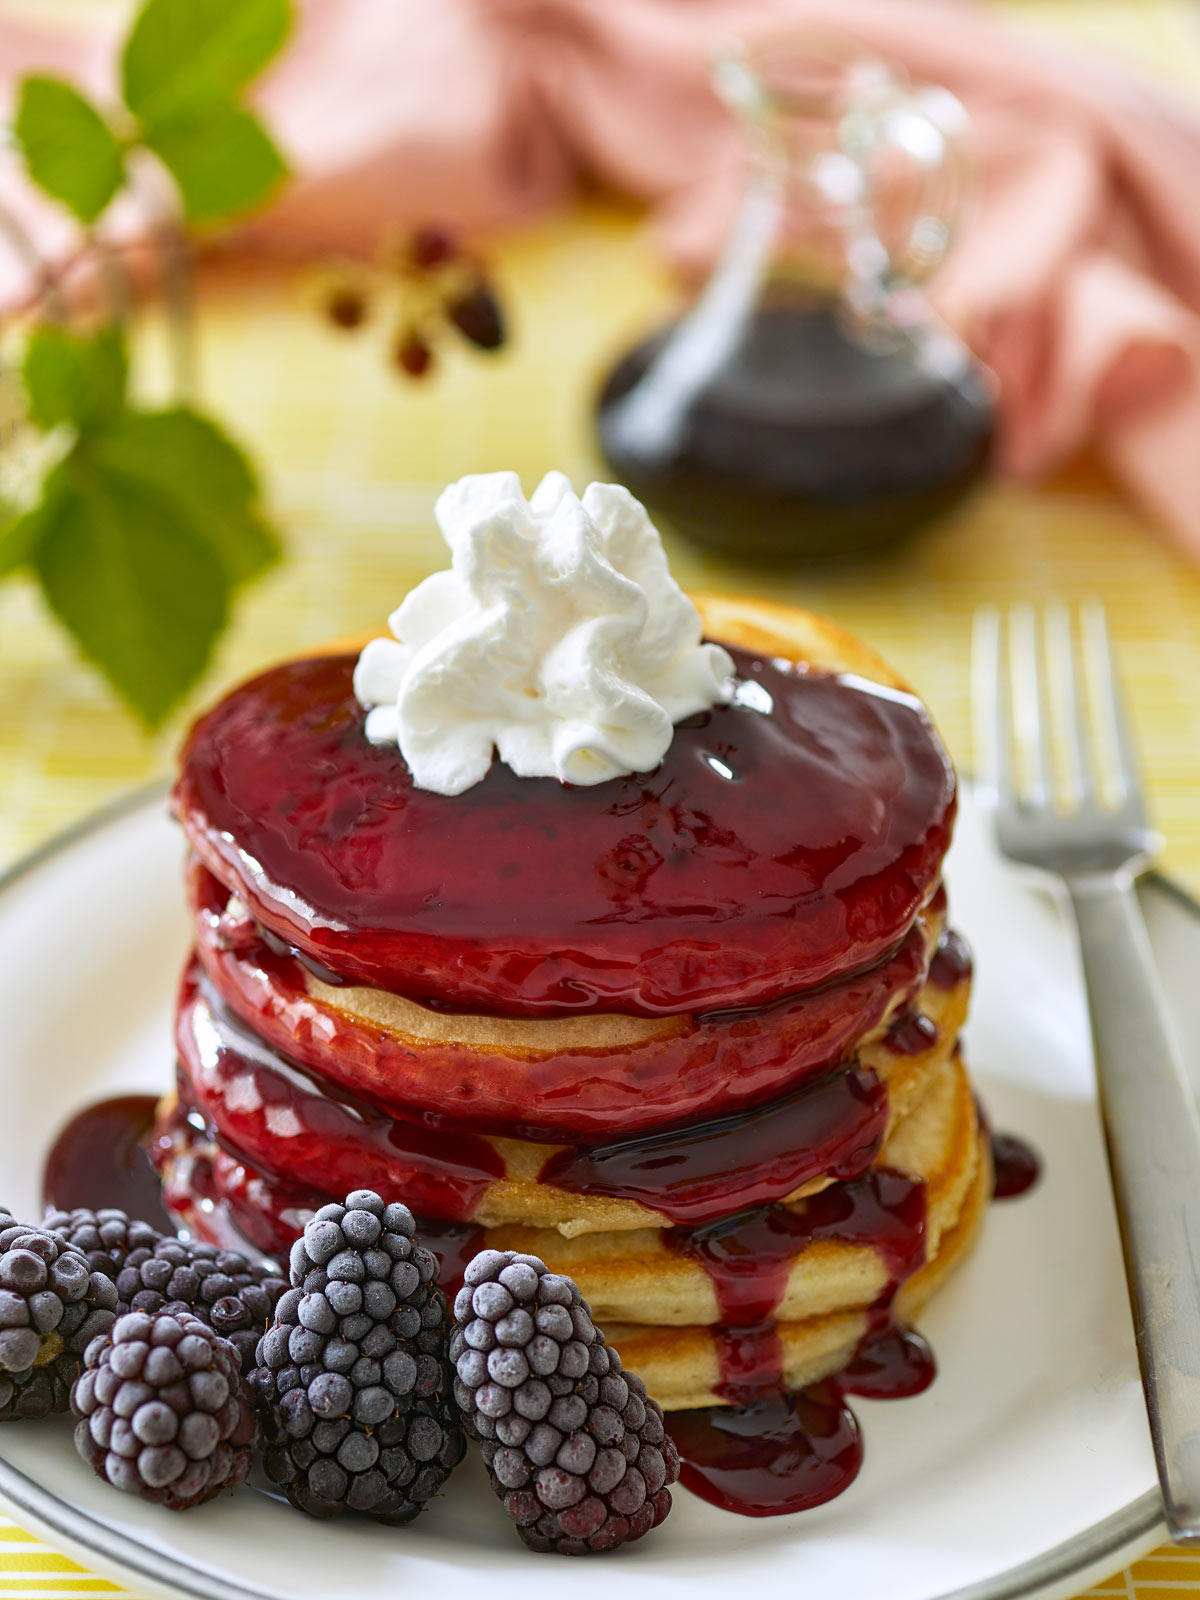 Blackberry syrup flowing over a stack of pancakes.